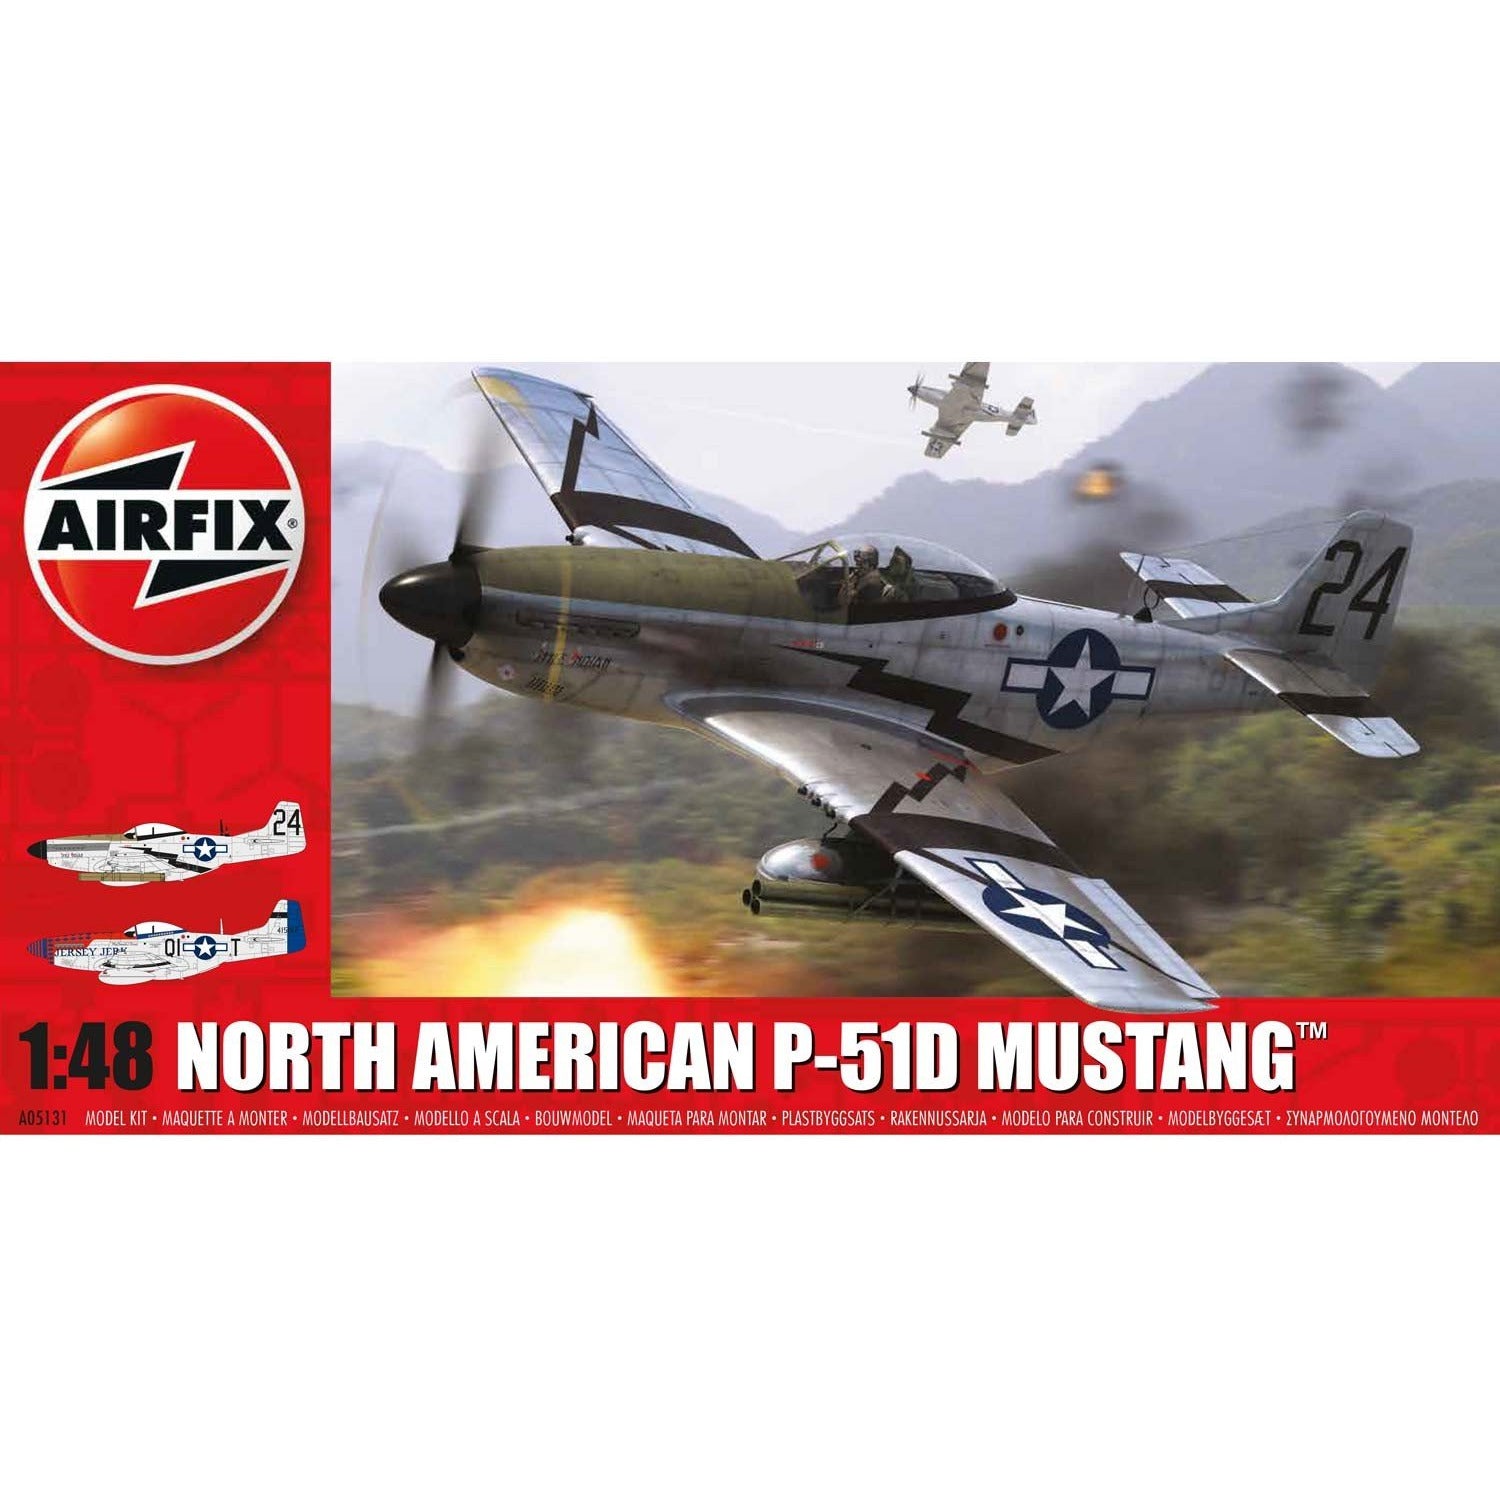 P-51 Mustang 1/48 #05131 by Airfix